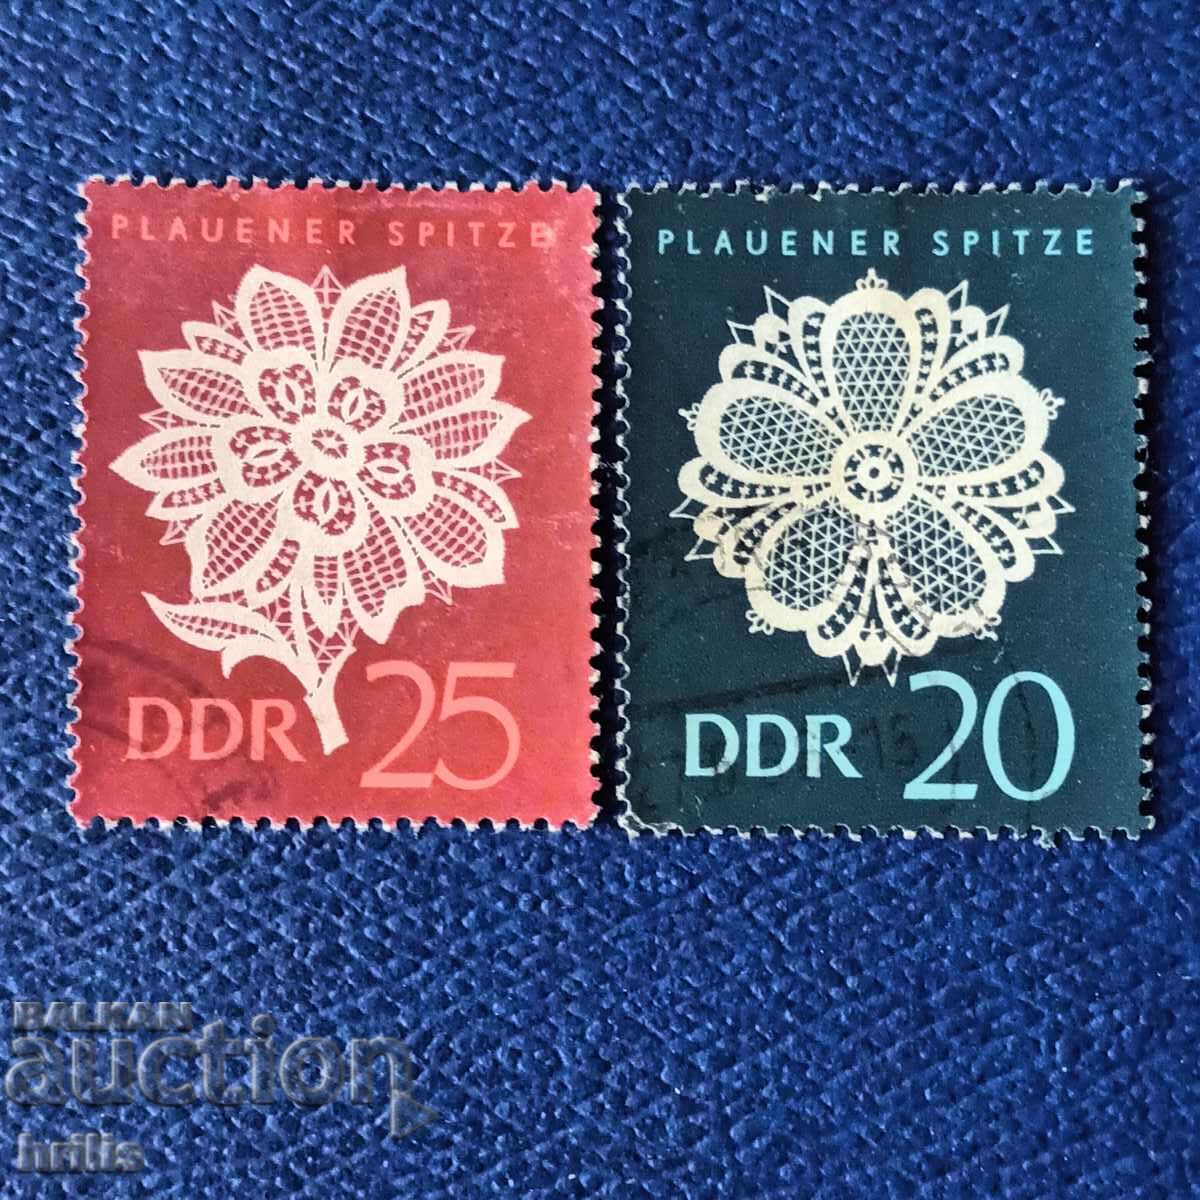 GDR 1960s - APPLIED ARTS